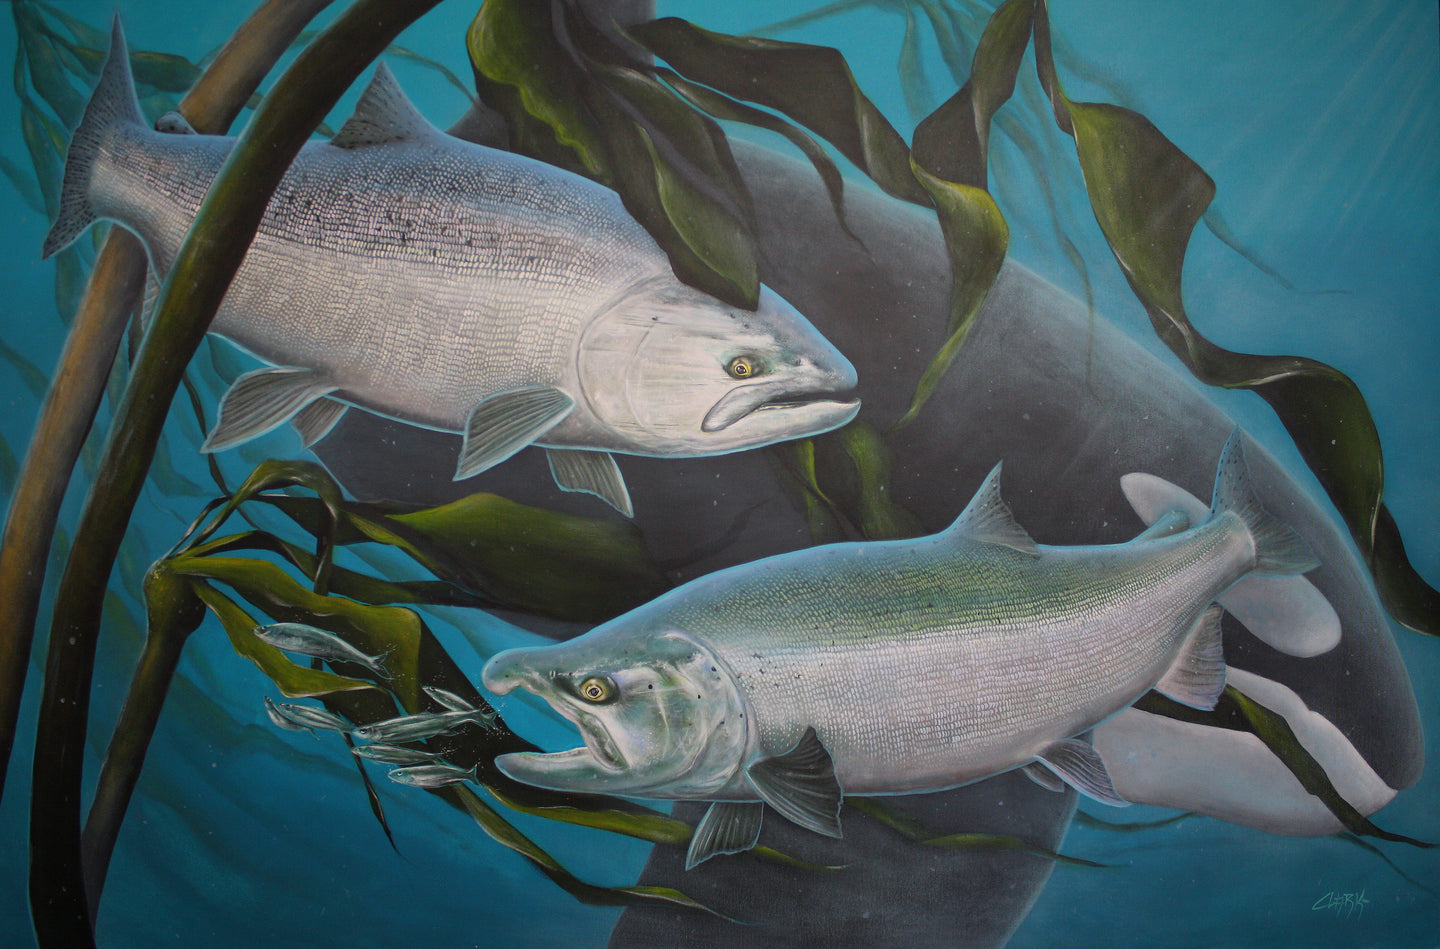 Tides & Tails Orca & Pacific Salmon (60x40) Original Acrylic Painting